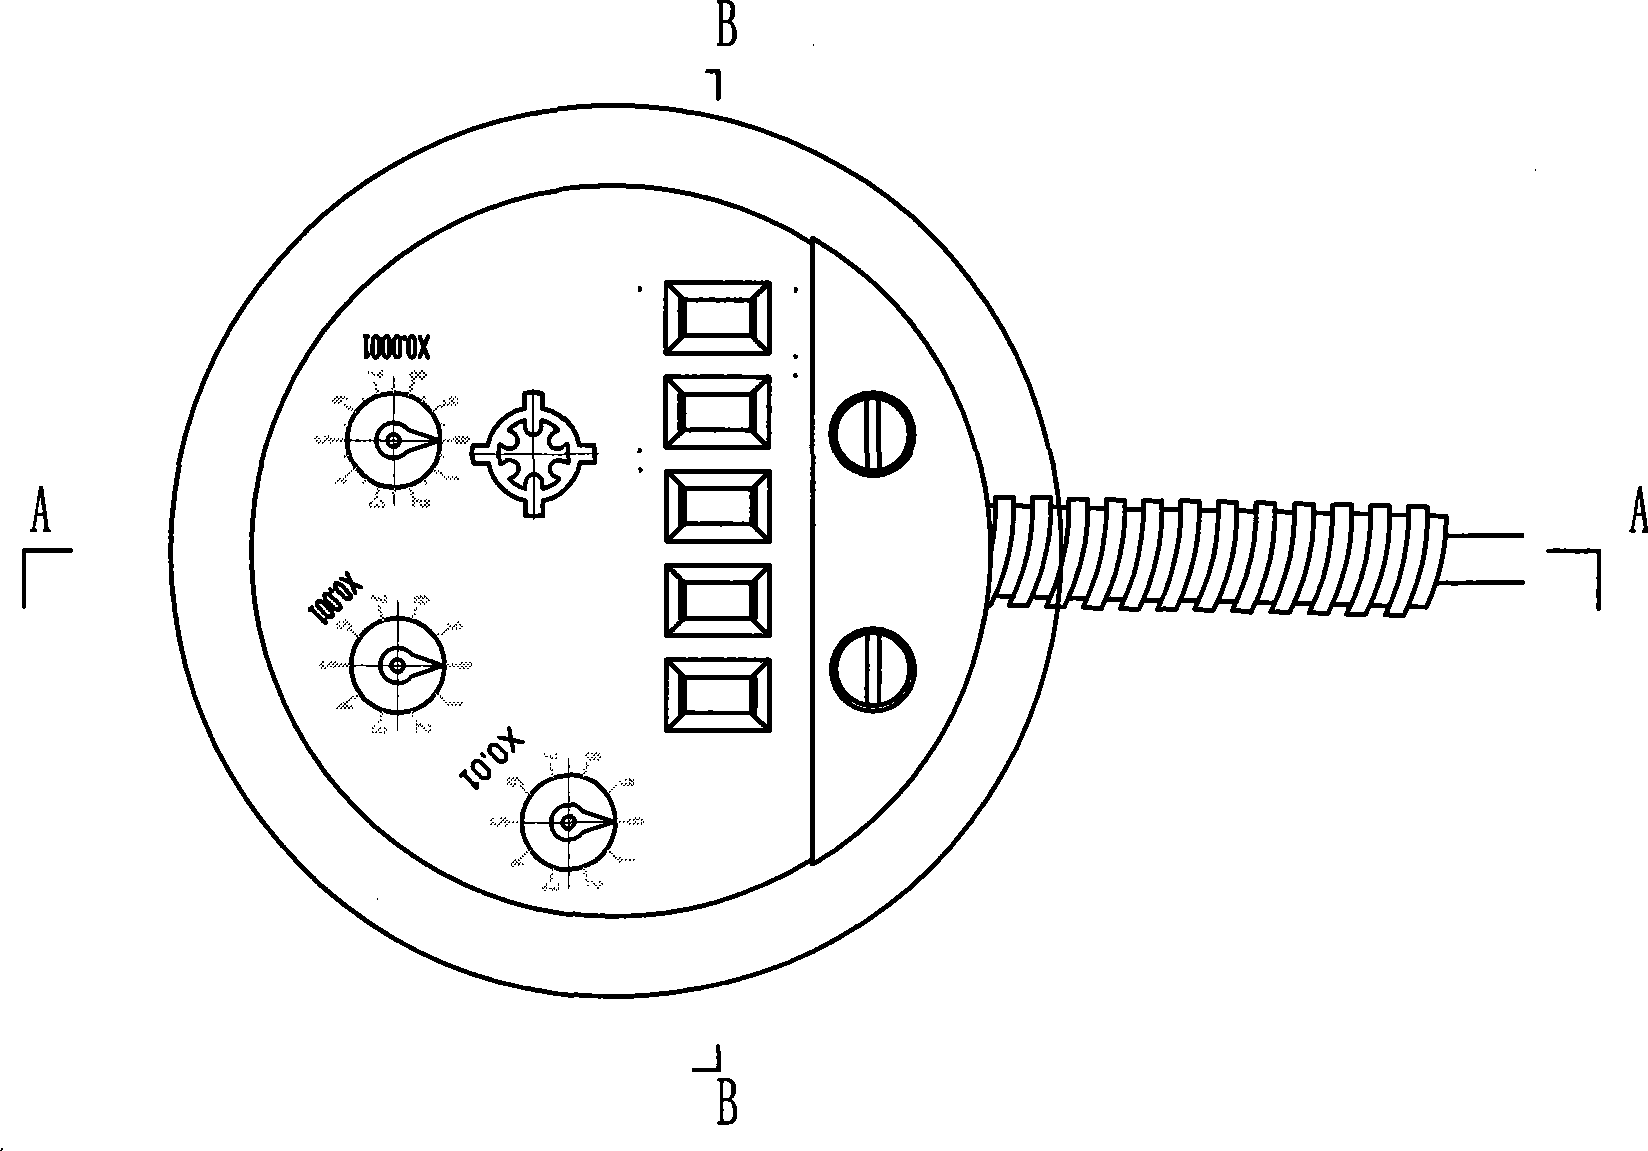 Liquid seal electronic direct-reading water meter